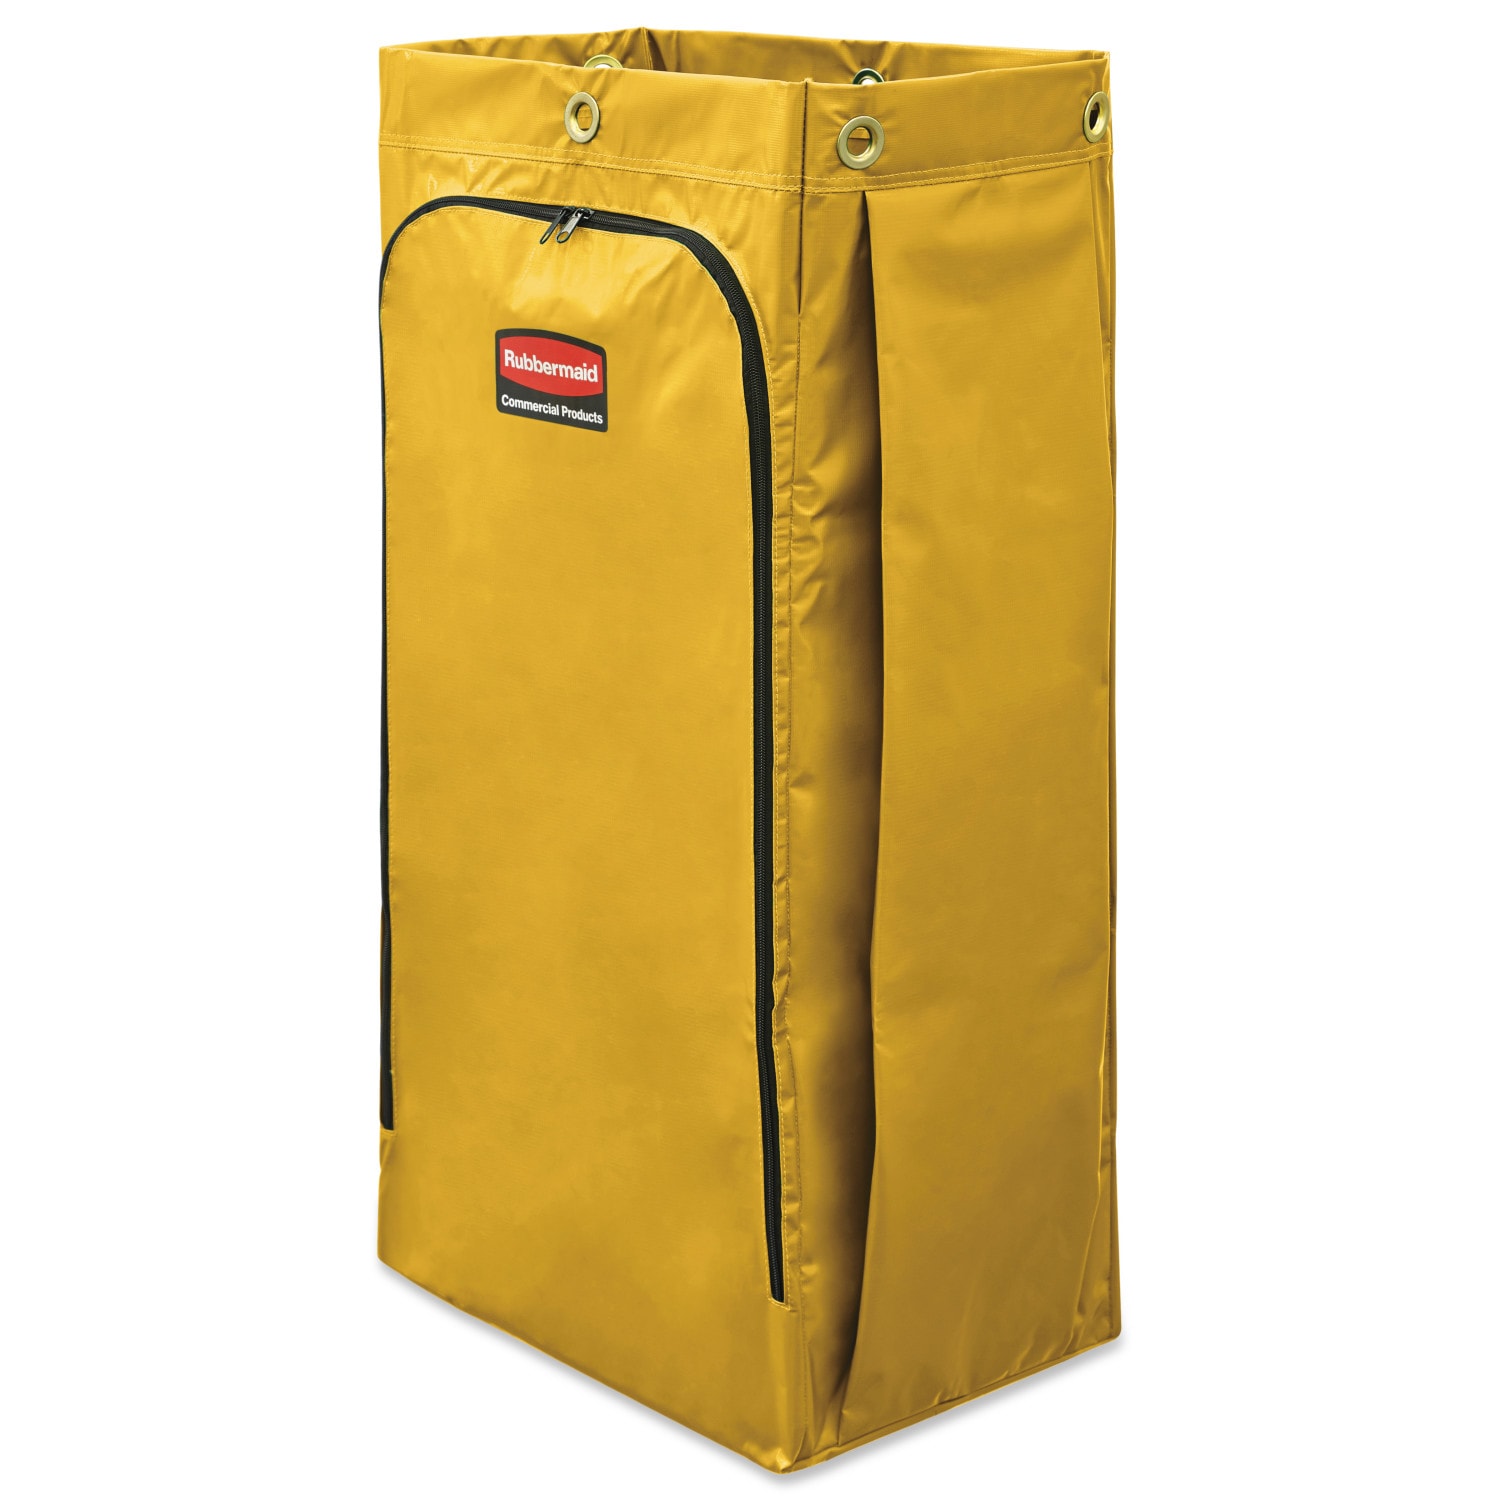 Rubbermaid Yellow Zippered Trash/Laundry Bag 24 Gallon for Cart NOS 